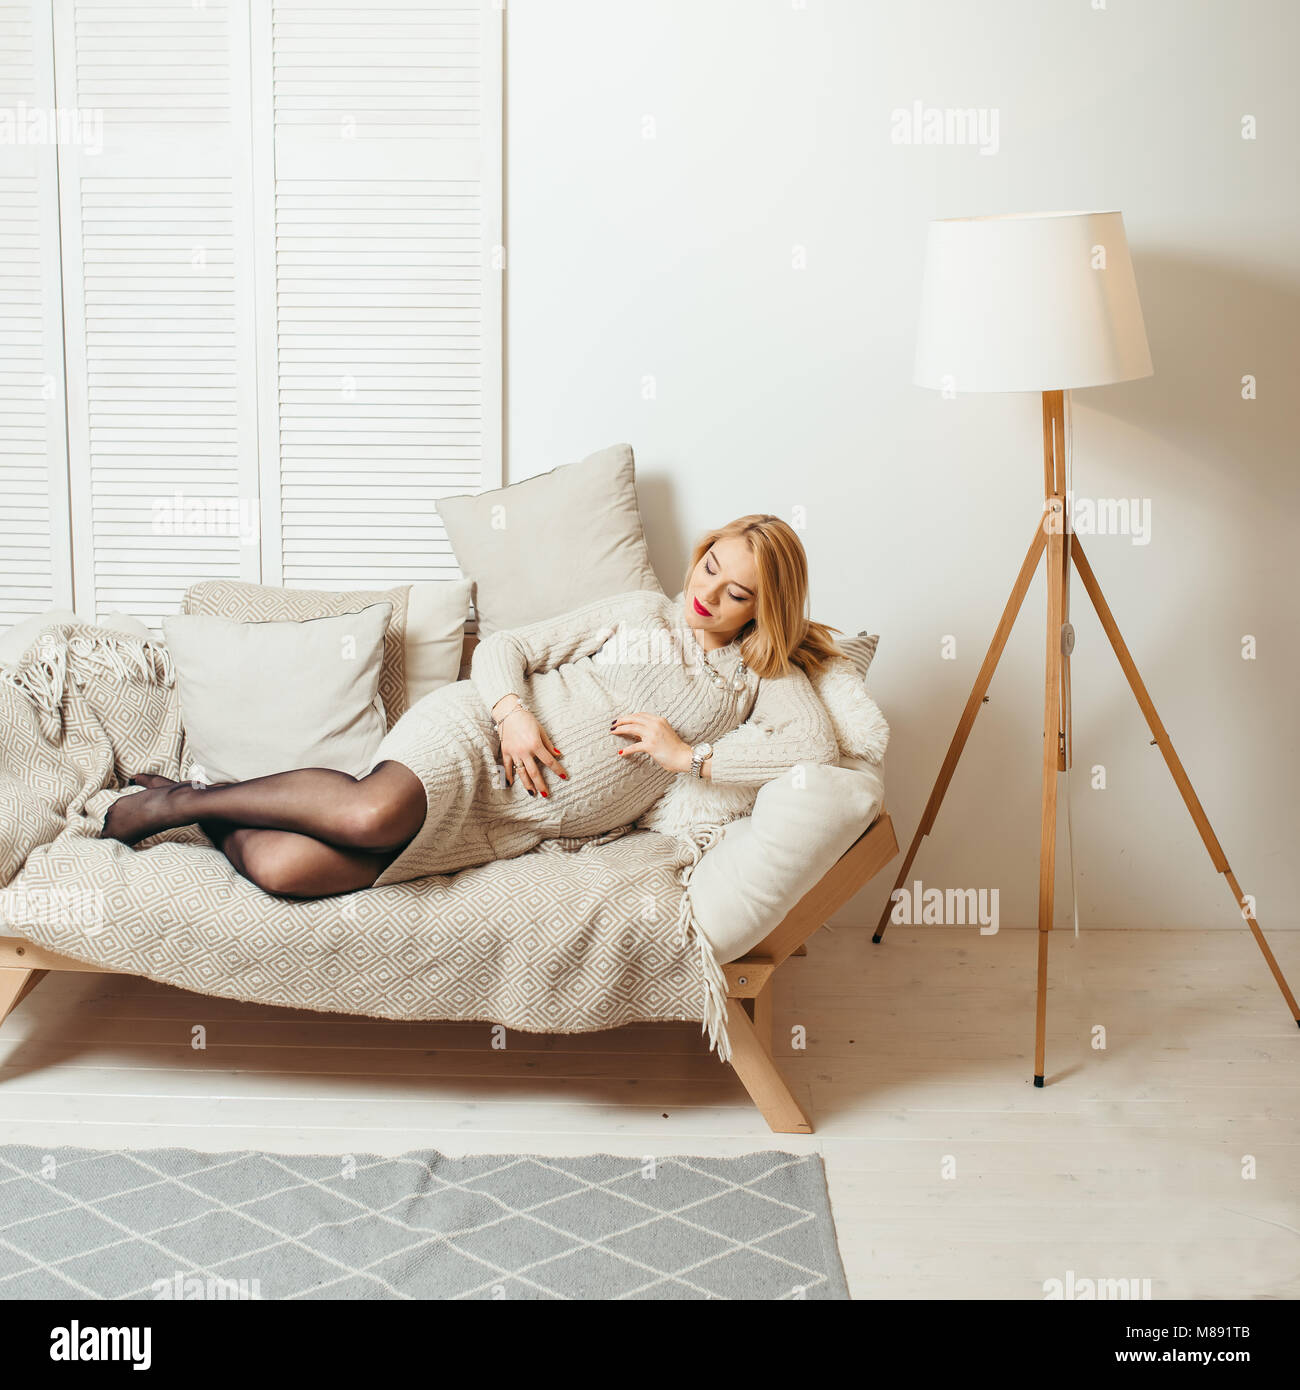 Beautiful blonde pregnant woman with red lipstick is touching her stomach and laying on the cozy sofa in the white room. Stock Photo